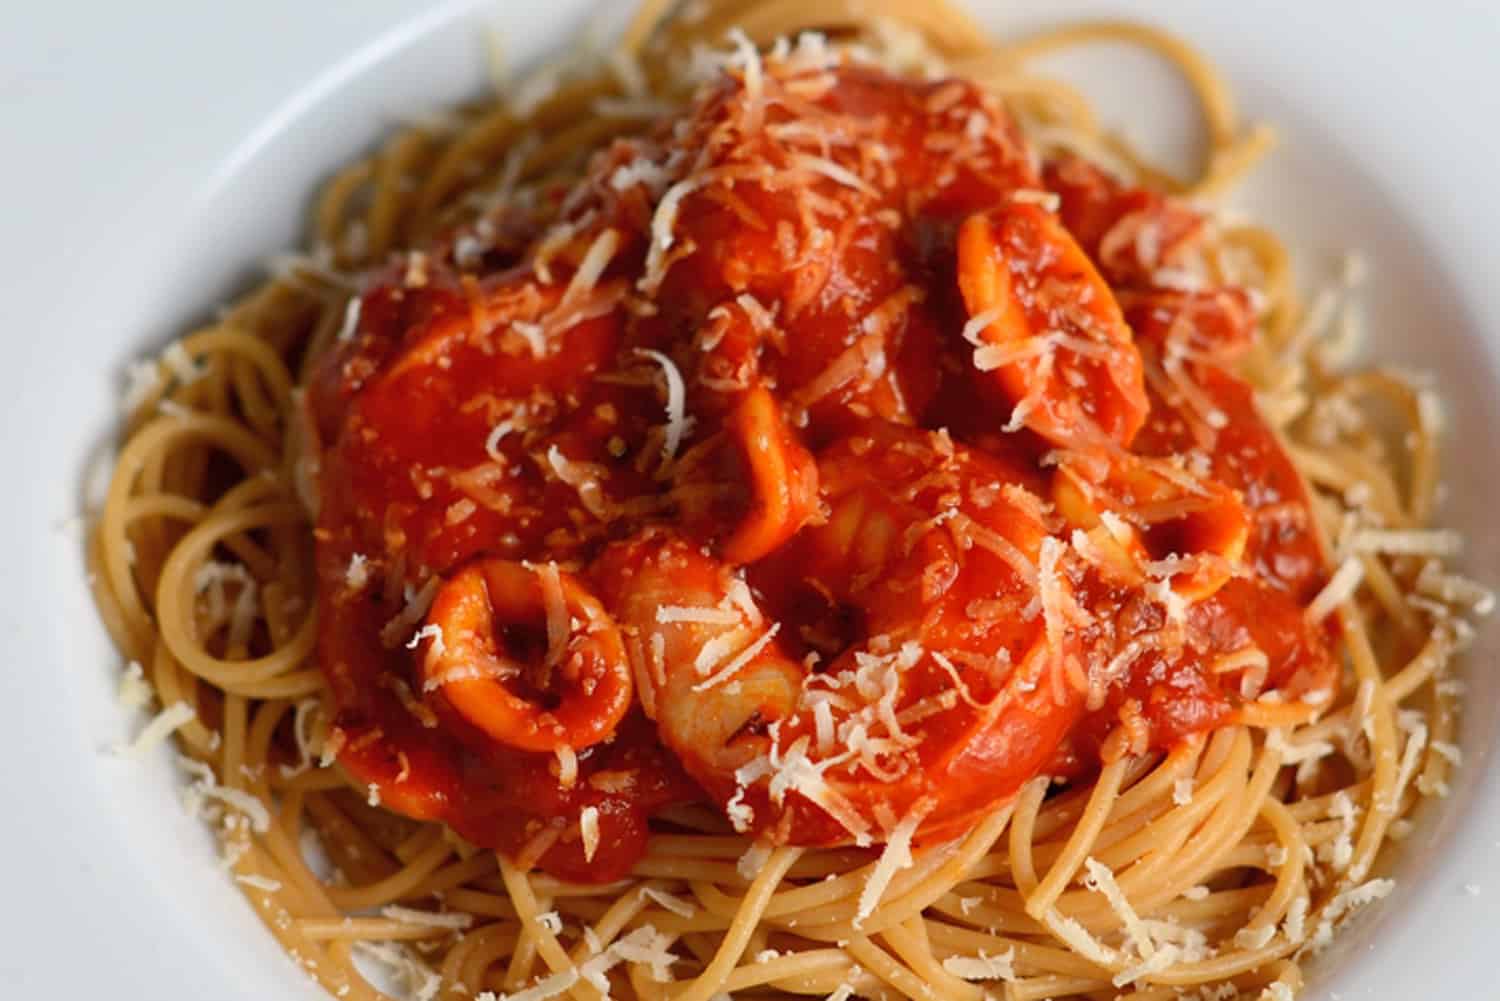 This Seafood Fra Diavolo Recipe is one of my favorite seafood pasta recipes ever! Fra Diavolo is a deliciously spicy marinara with fresh seafood! #fradiavolorecipe #shrimpfradiavolo www.savoryexperiments.com 